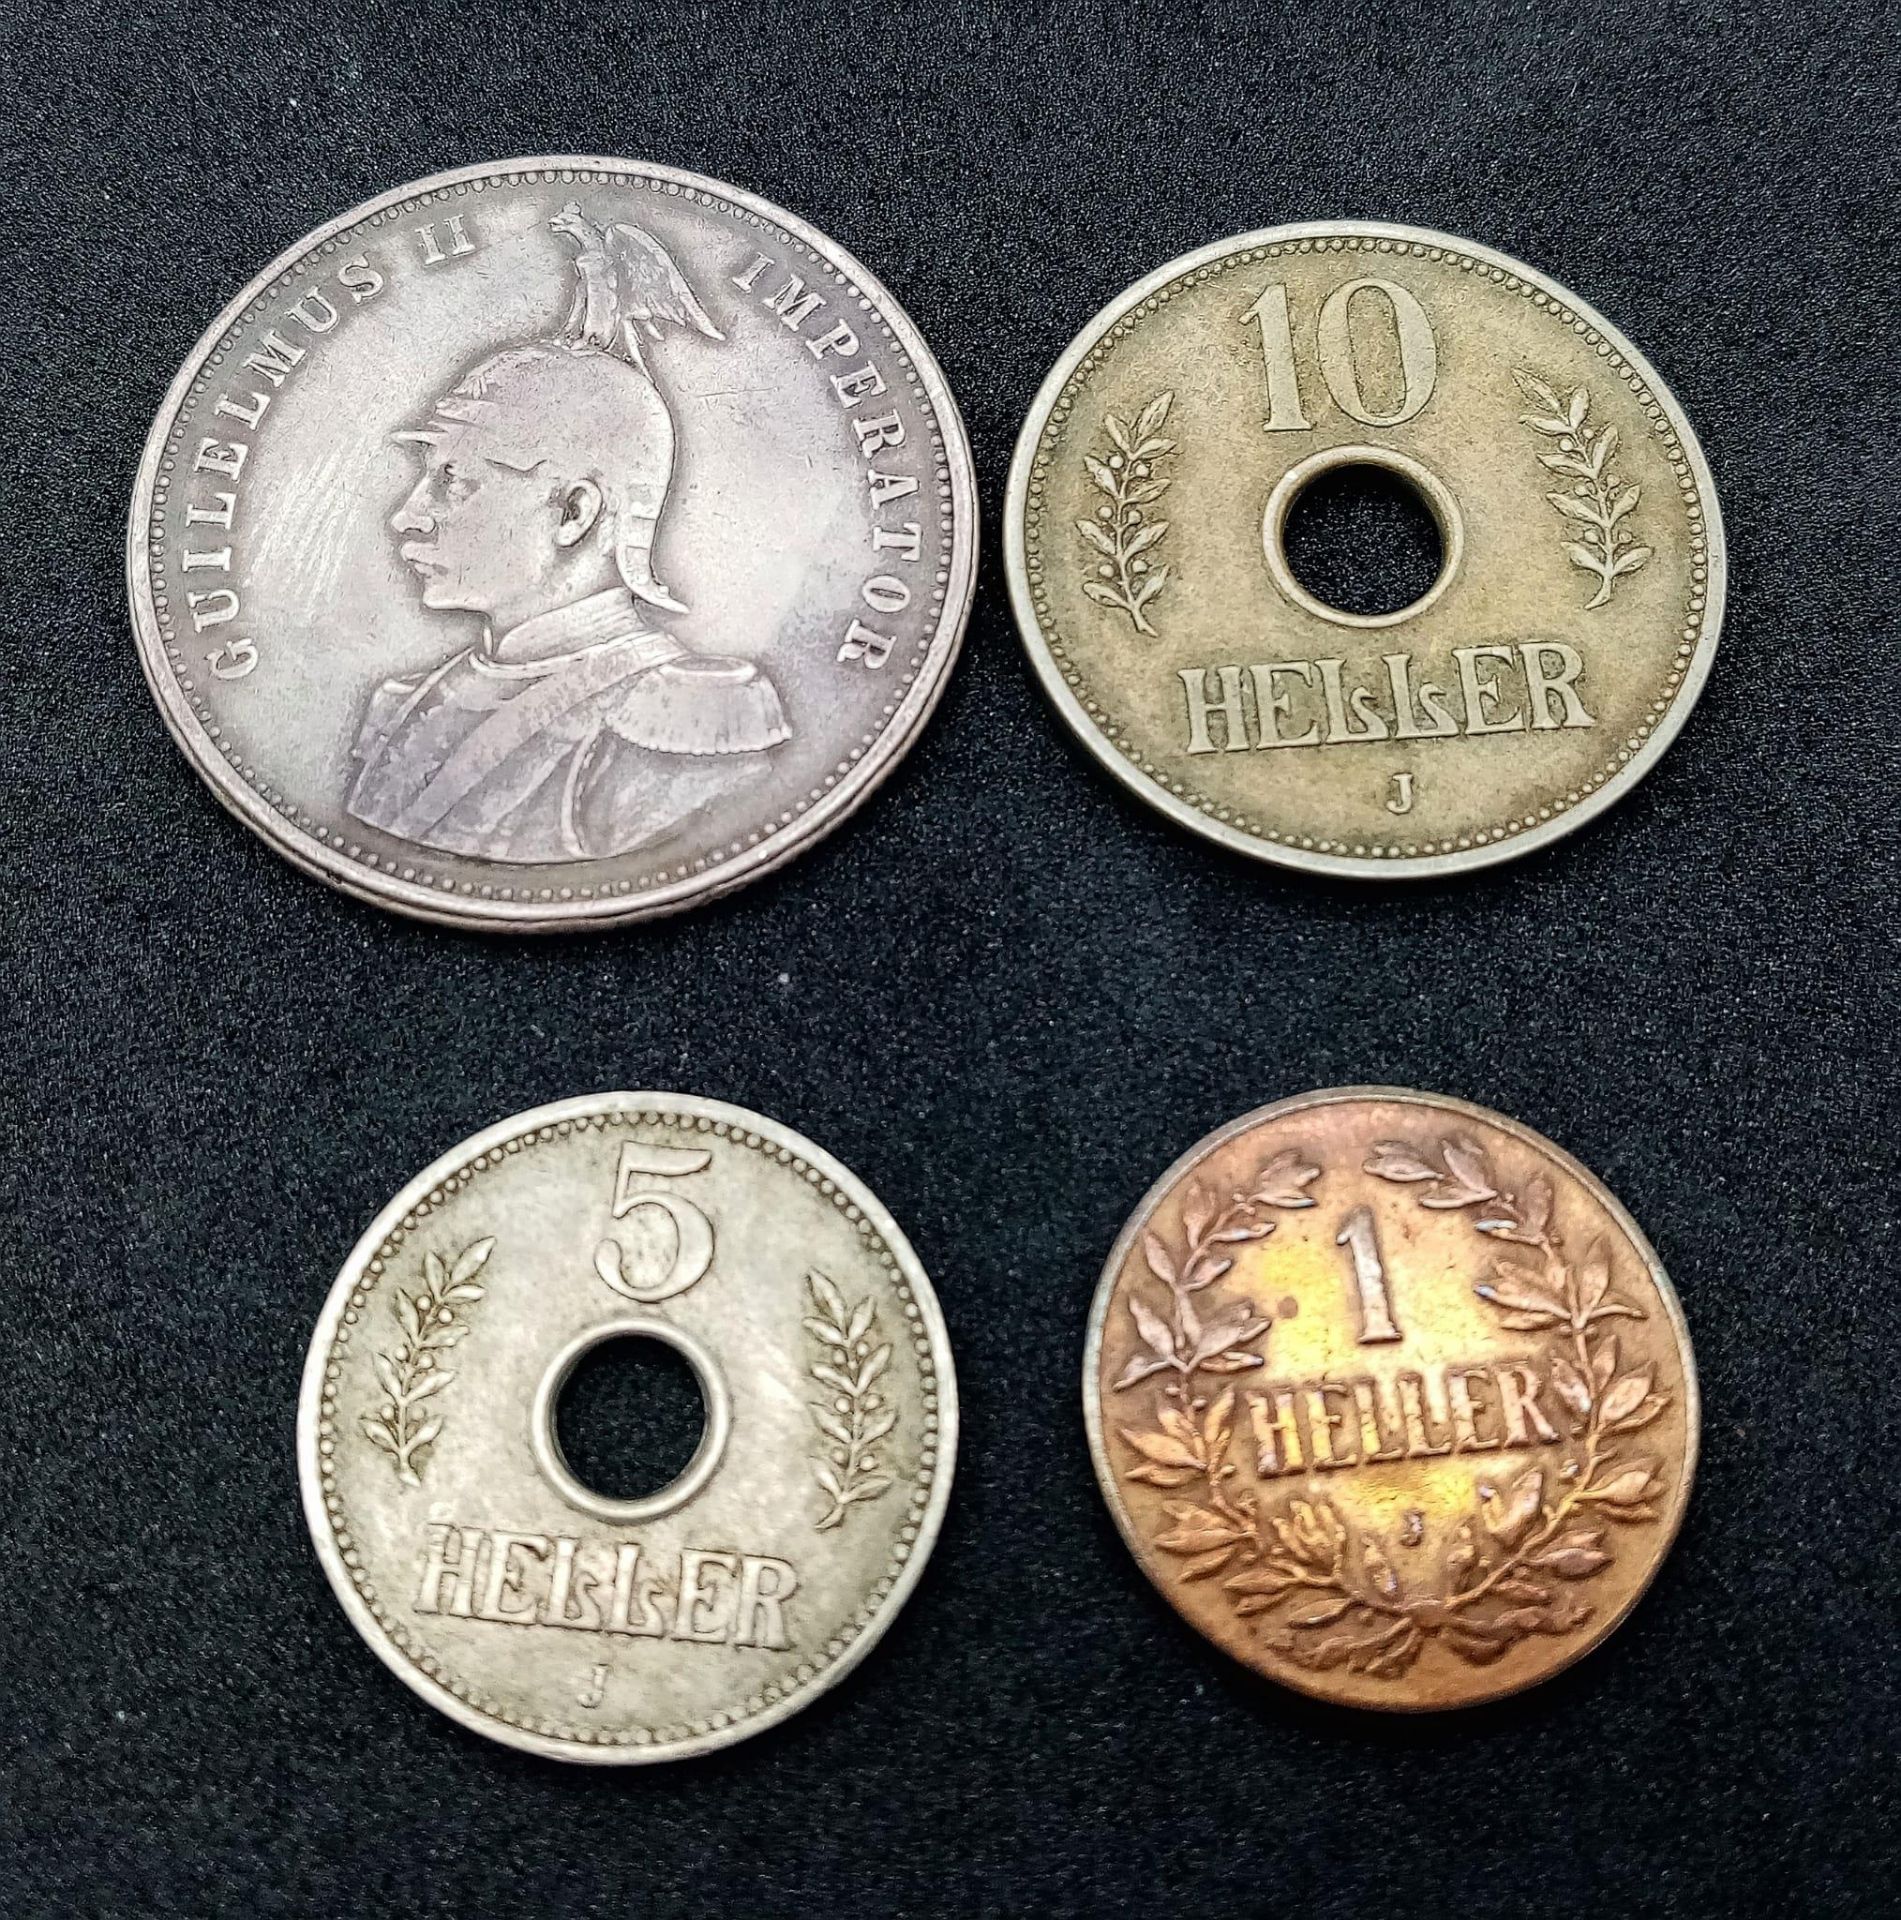 Four Antique East African German Coins - Silver One Rupie, 1910 10 heller, 1914 5 heller and a - Image 2 of 3